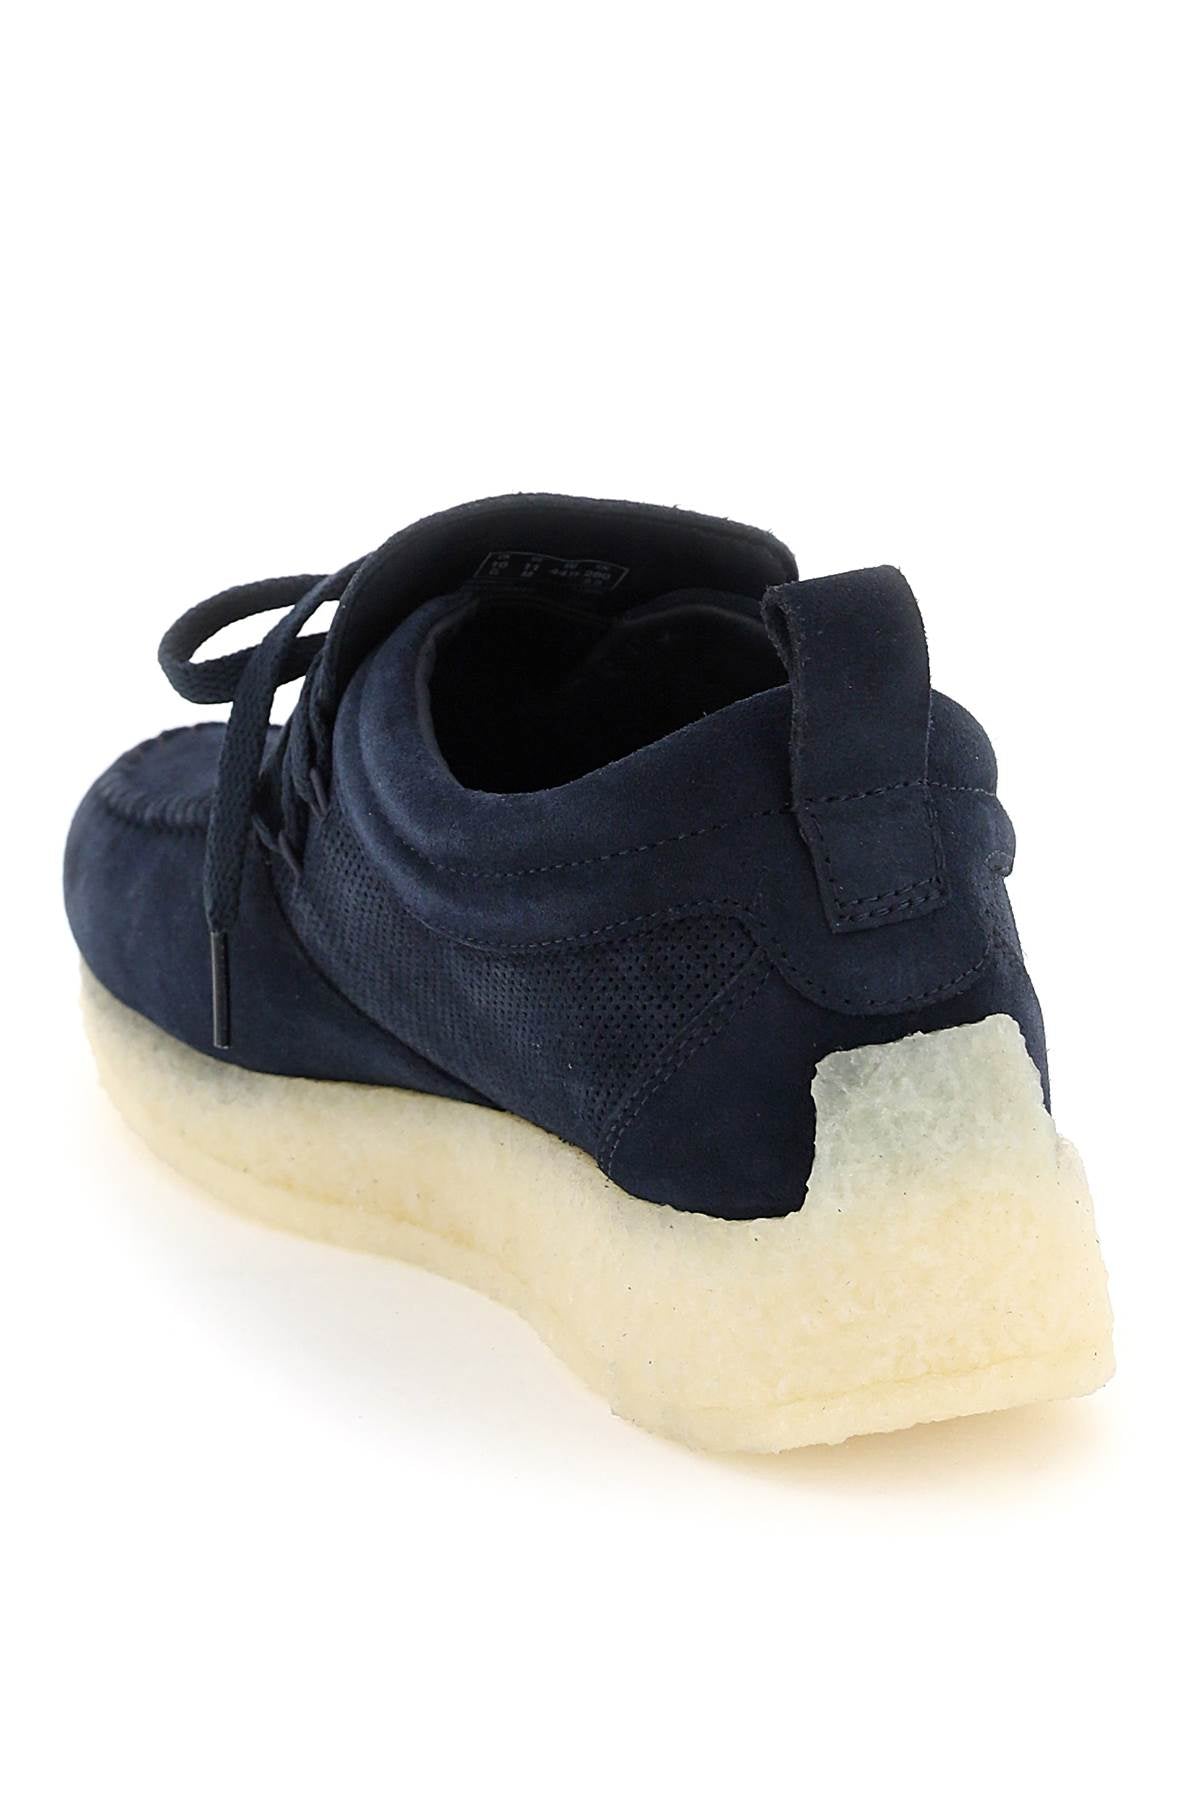 Ronnie fieg x clarks 'maycliffe' lace-up shoes-2